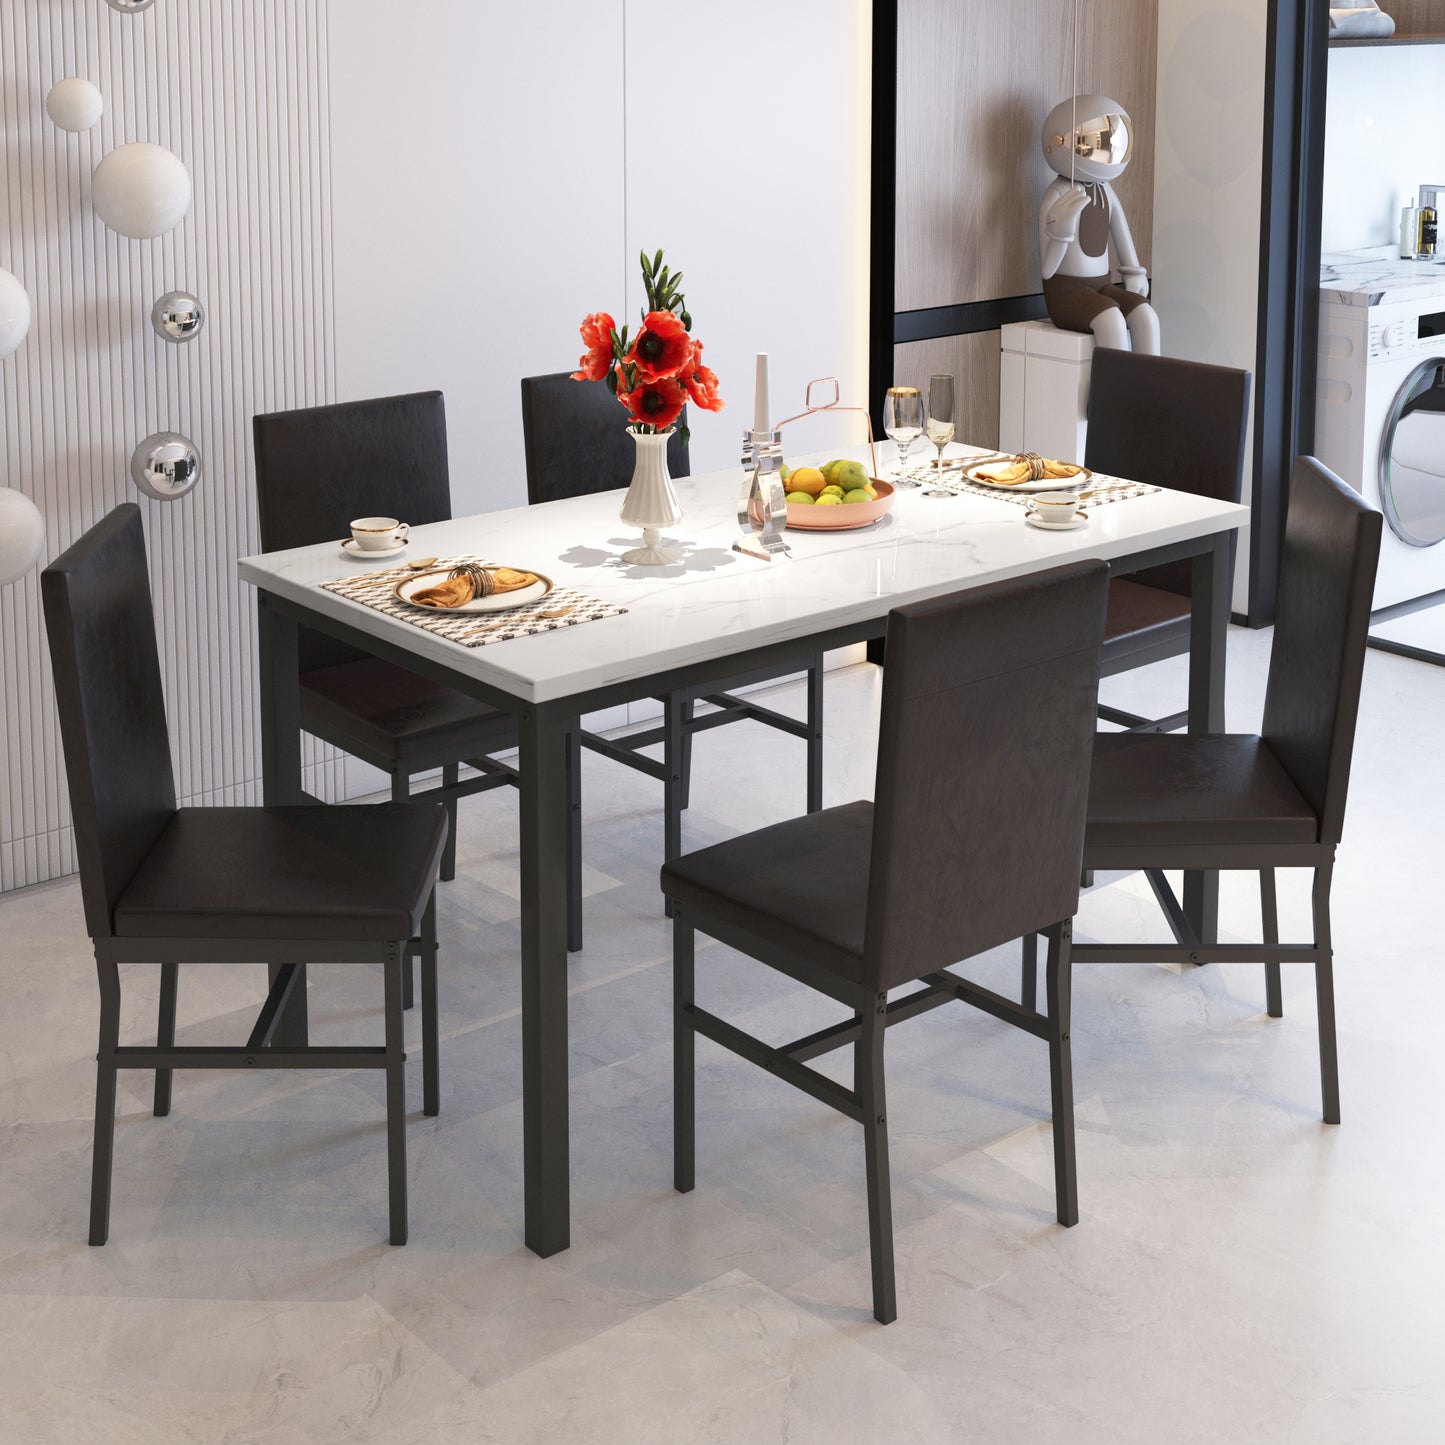 Modern Dining Table Set for 6, SYNGAR Faux Marble Table and PU Leather Upholstered Chairs Set, 7 Piece Kitchen Dining Set, Dining Table and Chairs Set for Small Space, Breakfast Nook, D9208